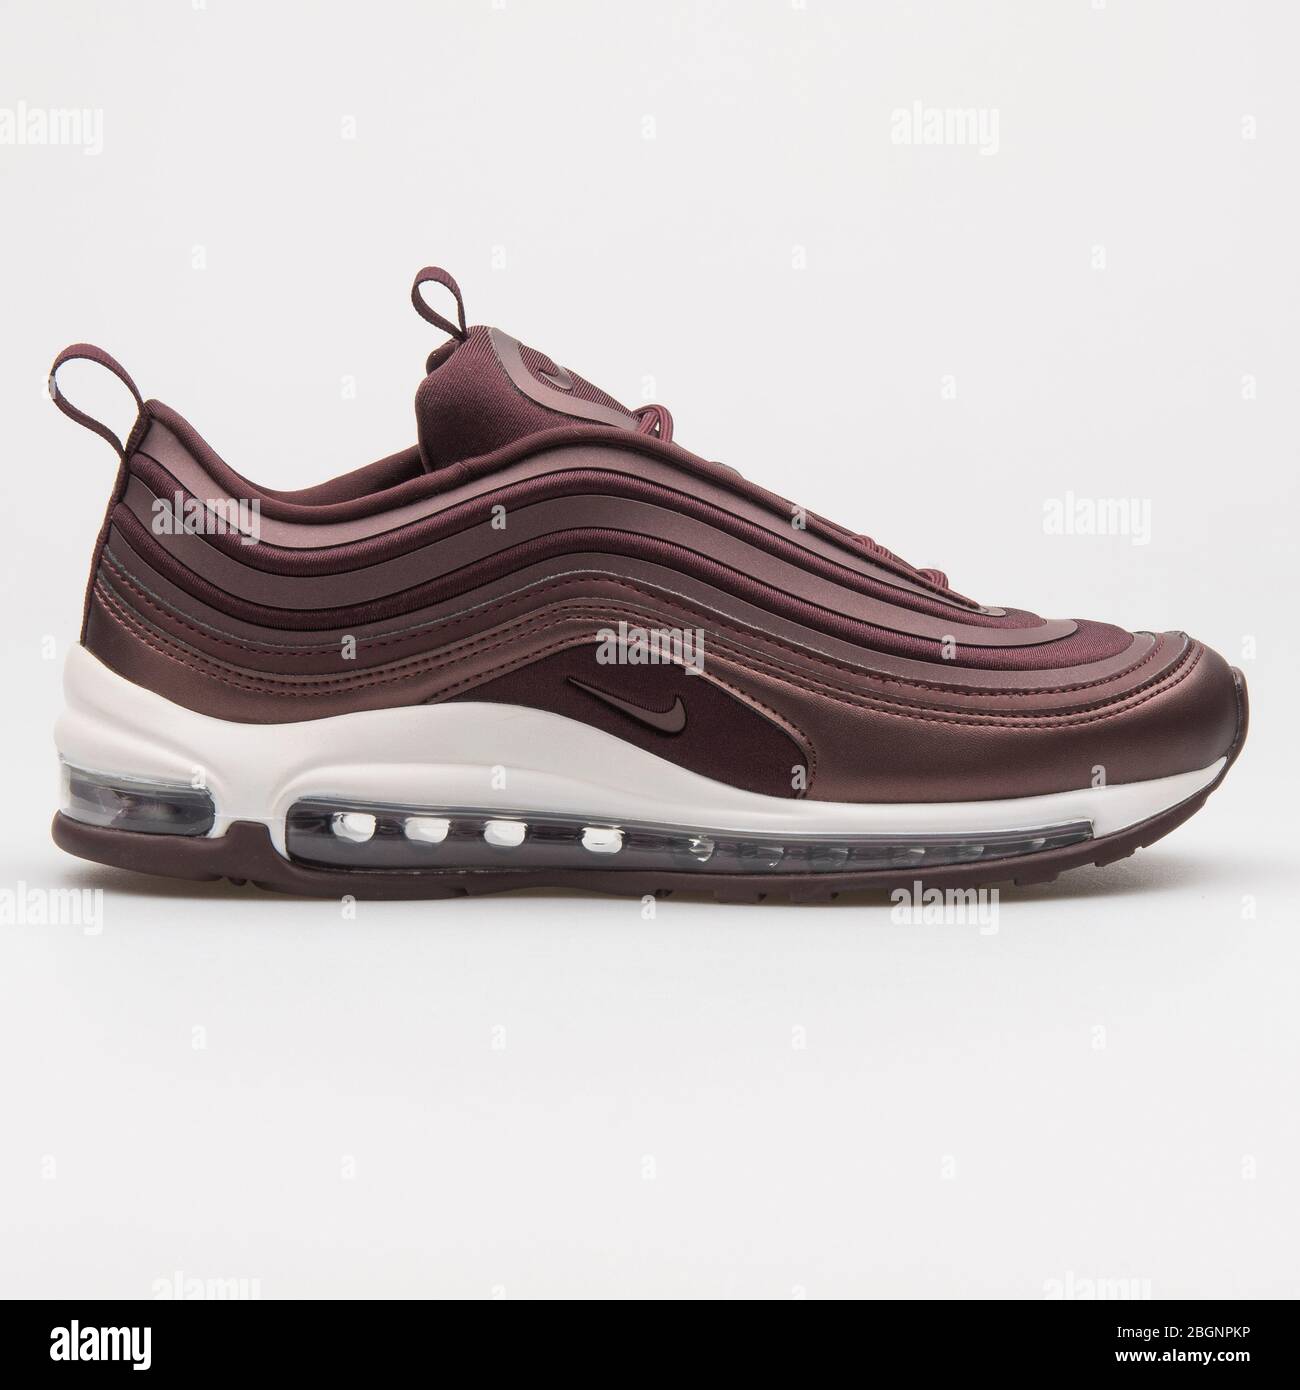 burgundy and gold air max 97